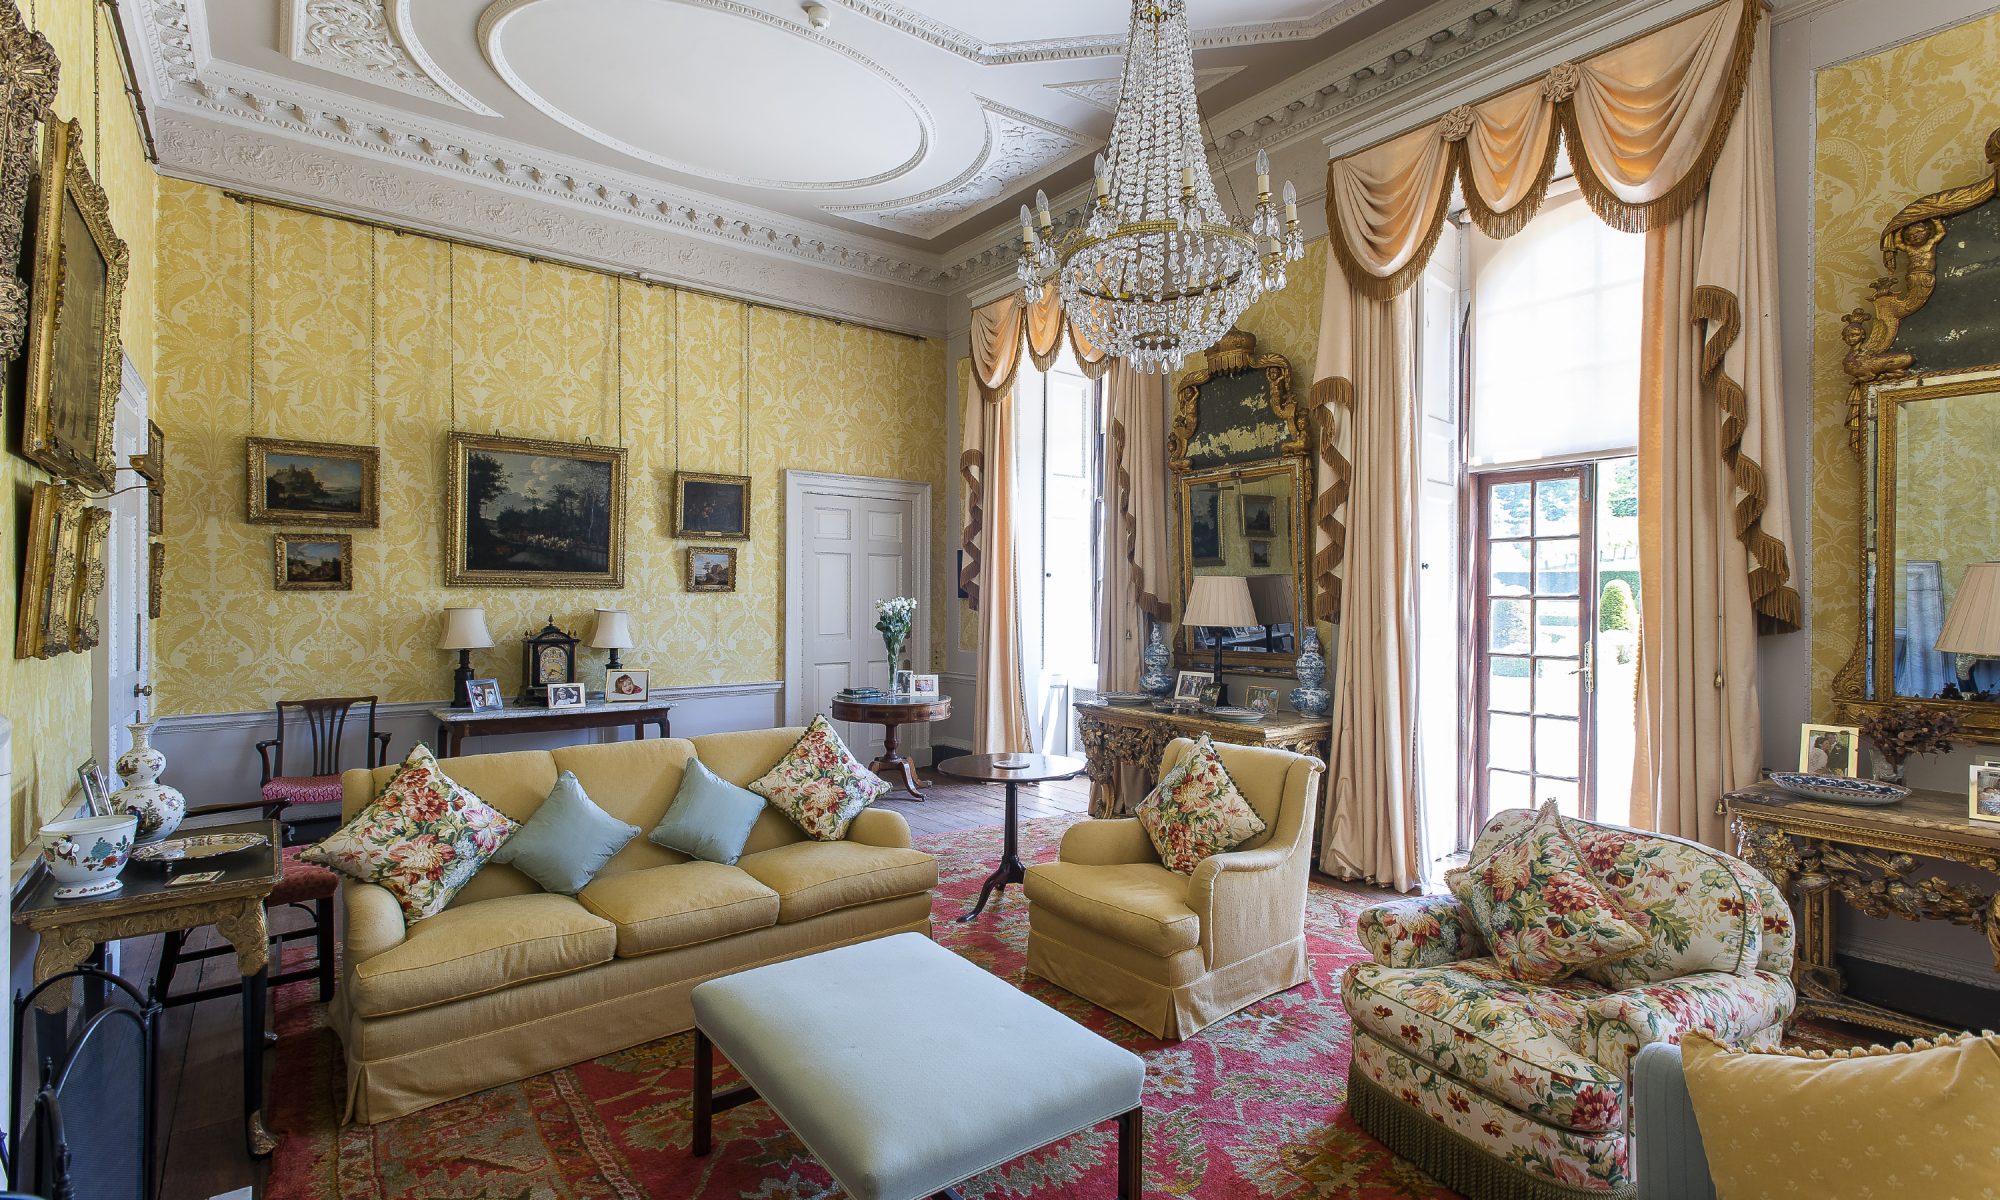 The drawing room was beautifully decorated by Henry’s mother Anthea with decorative wallpaper she commissioned specially. French windows take you out into the formal back garden